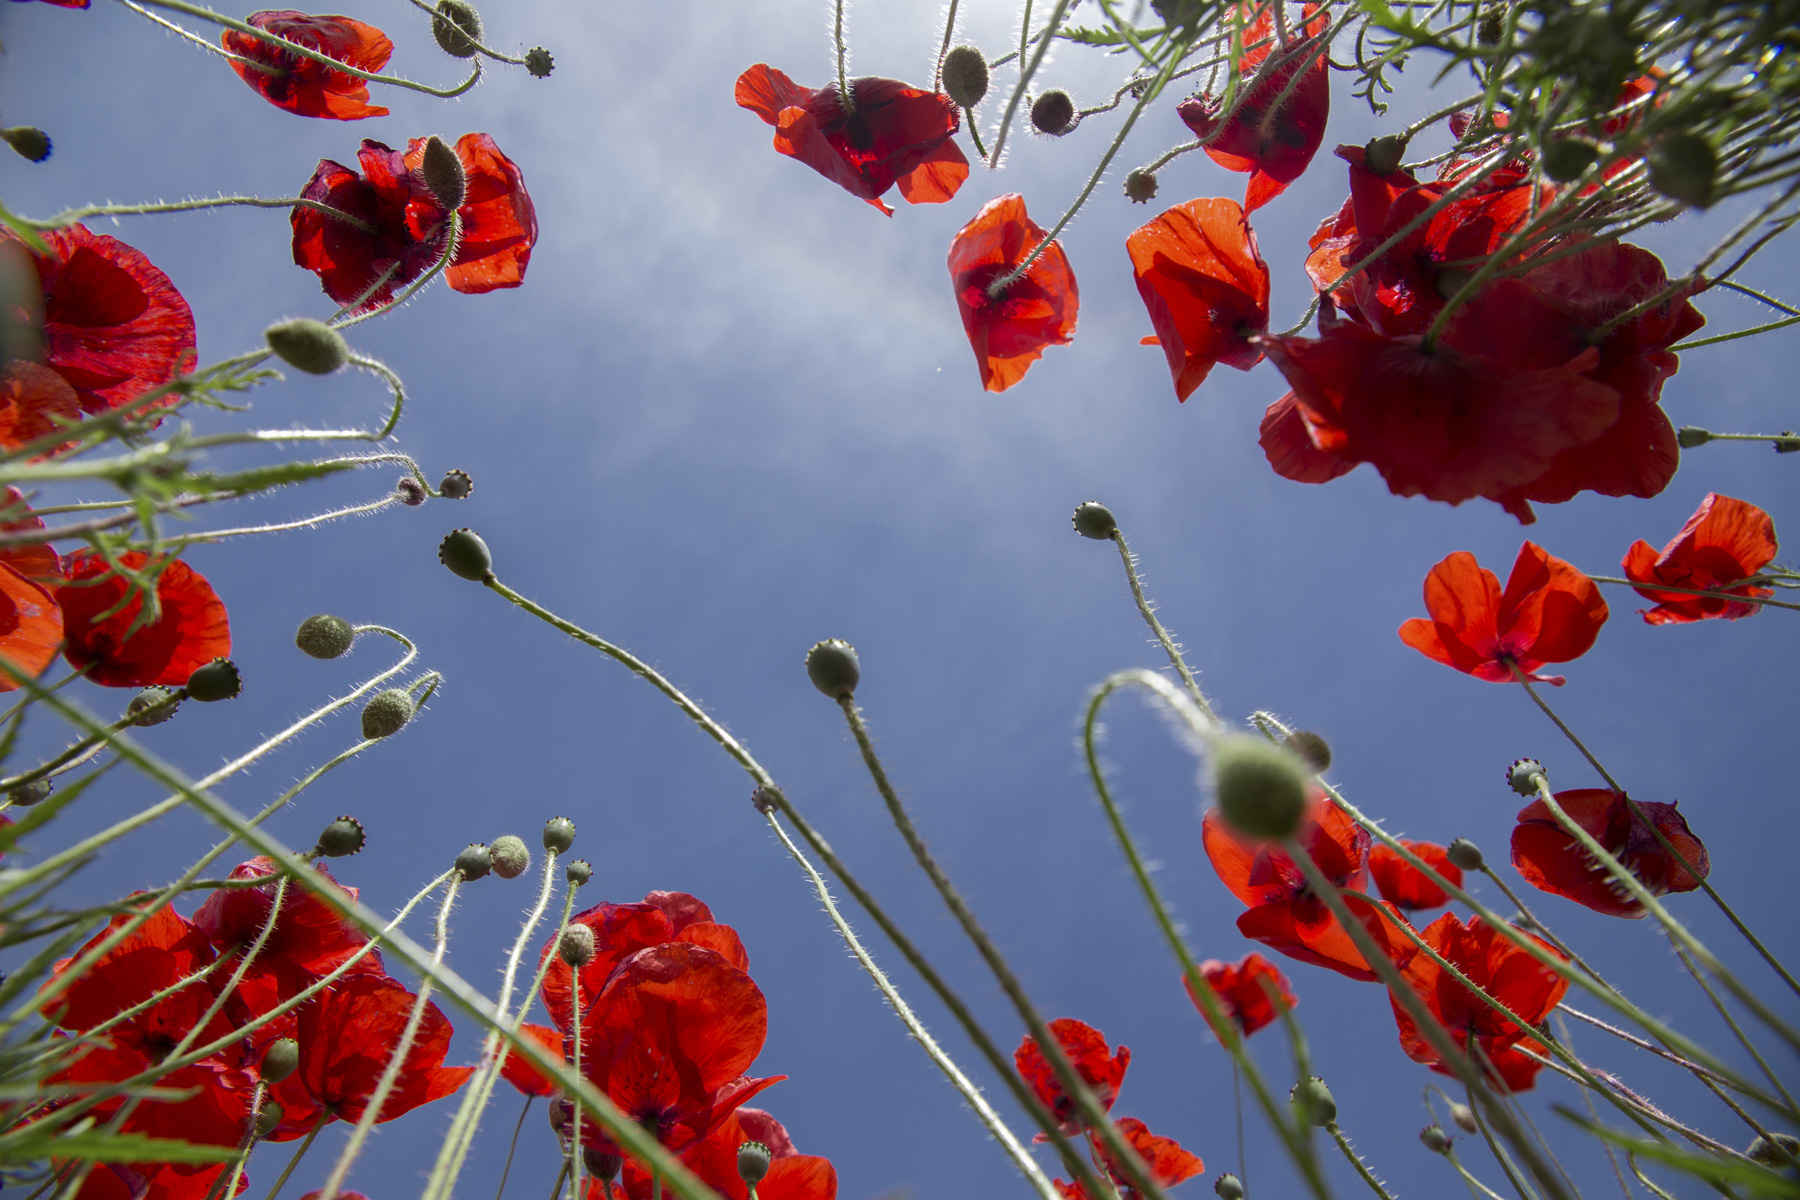 Worms eye view of poppies and blue sky